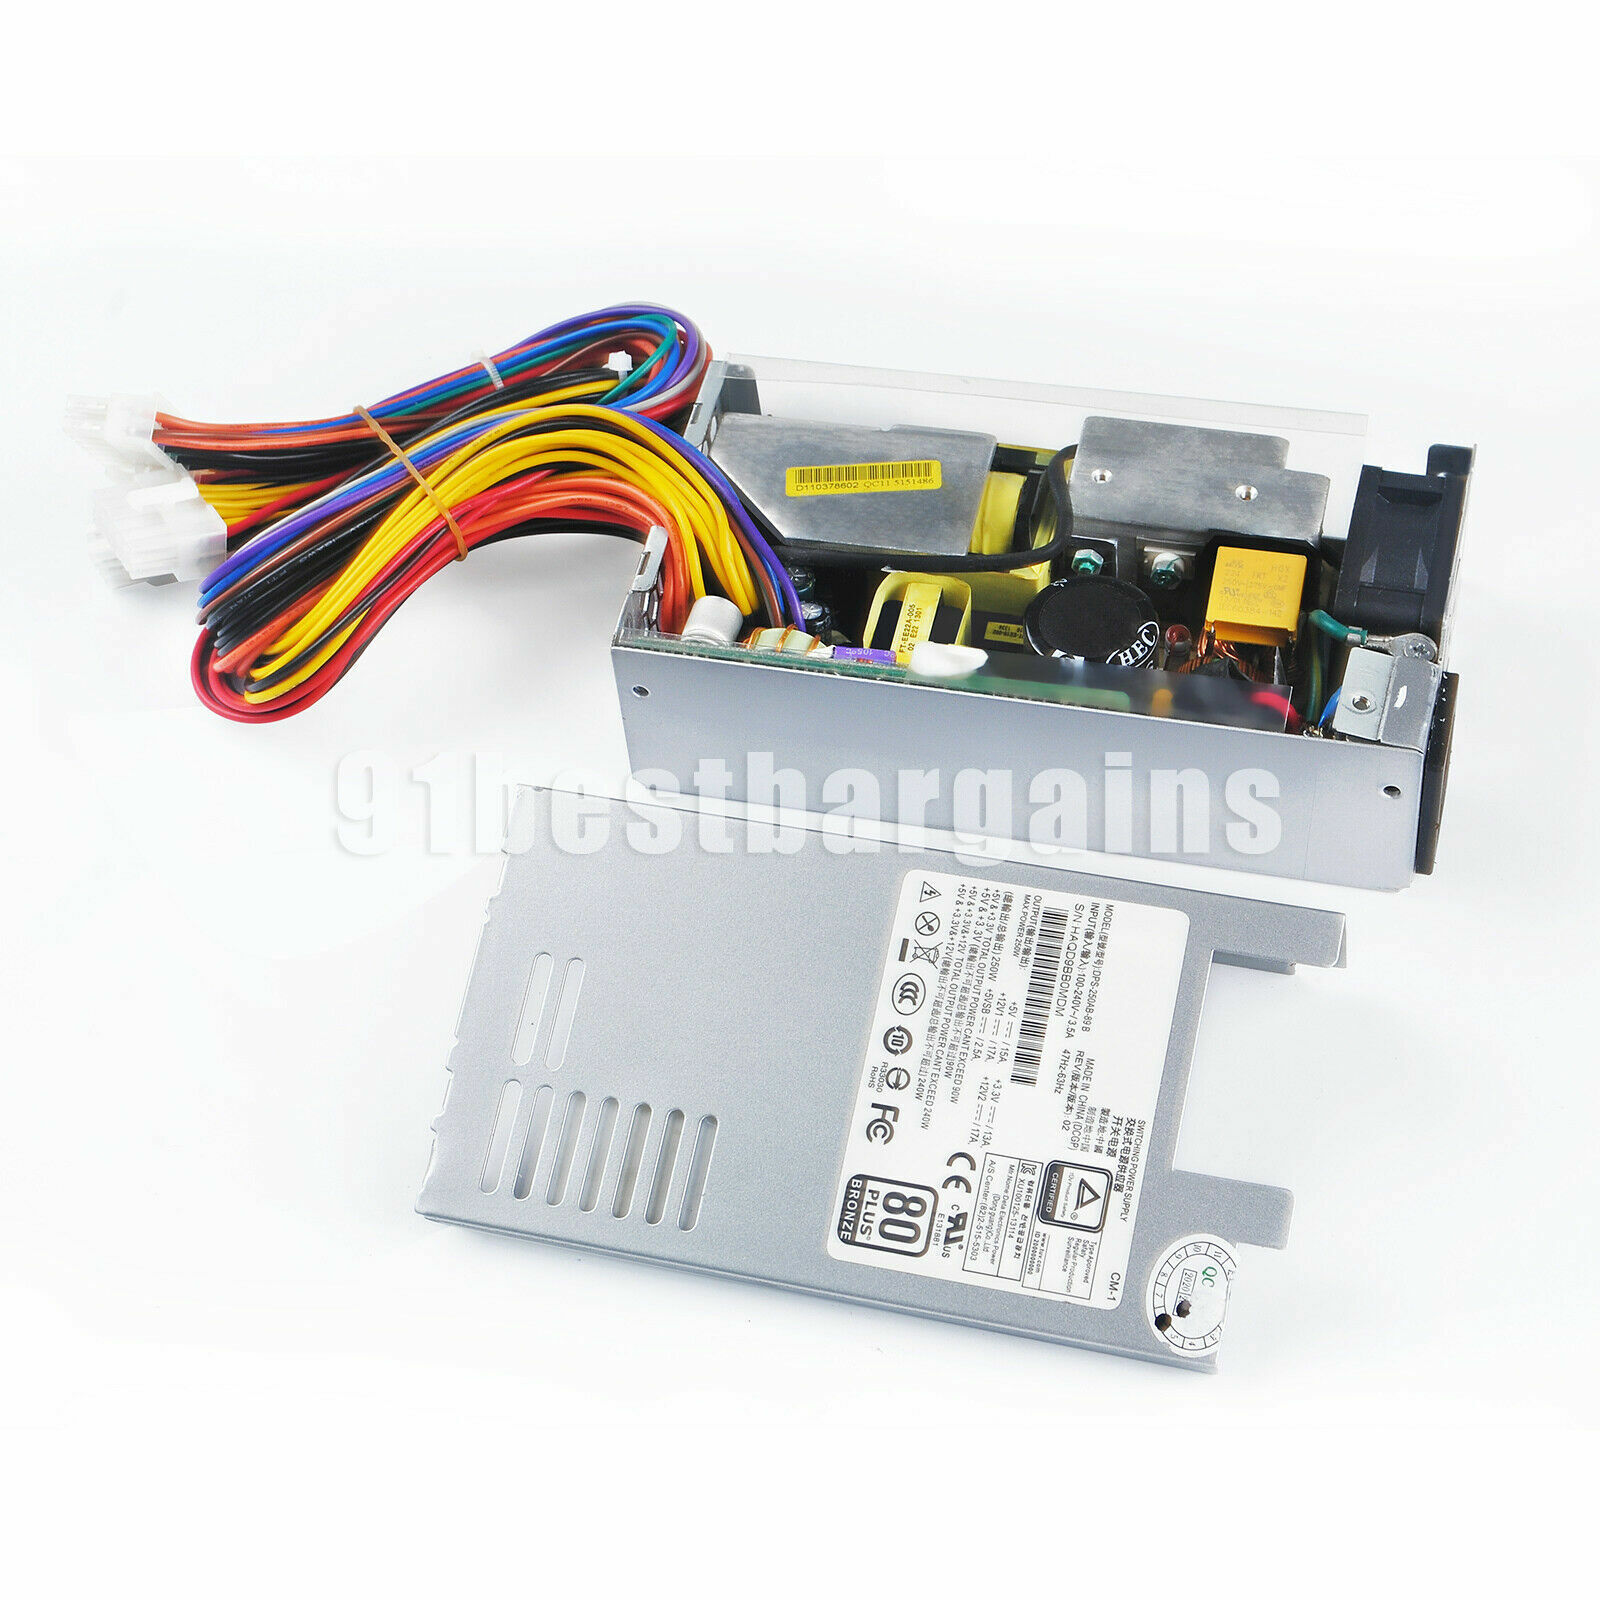 New FOR Delta DPS-250AB-44B 89B 1Uflex Server NAS Host Power Supply Replacement